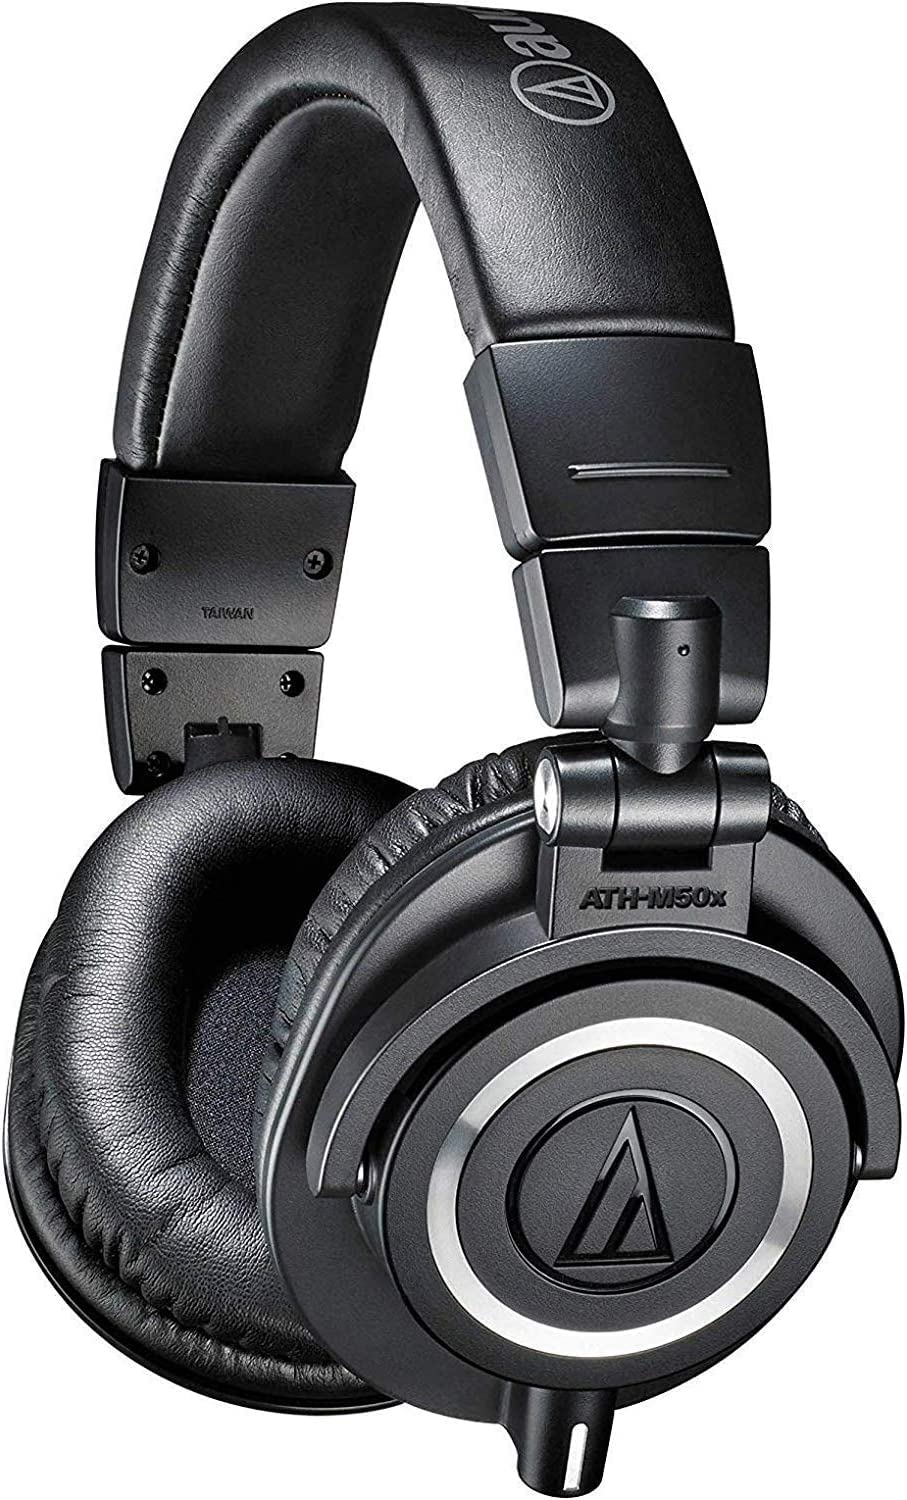 audio-technica ATH-M50X Professional Studio Monitor Headphones, Black, Professional Grade, Critically Acclaimed, with Detachable Cable